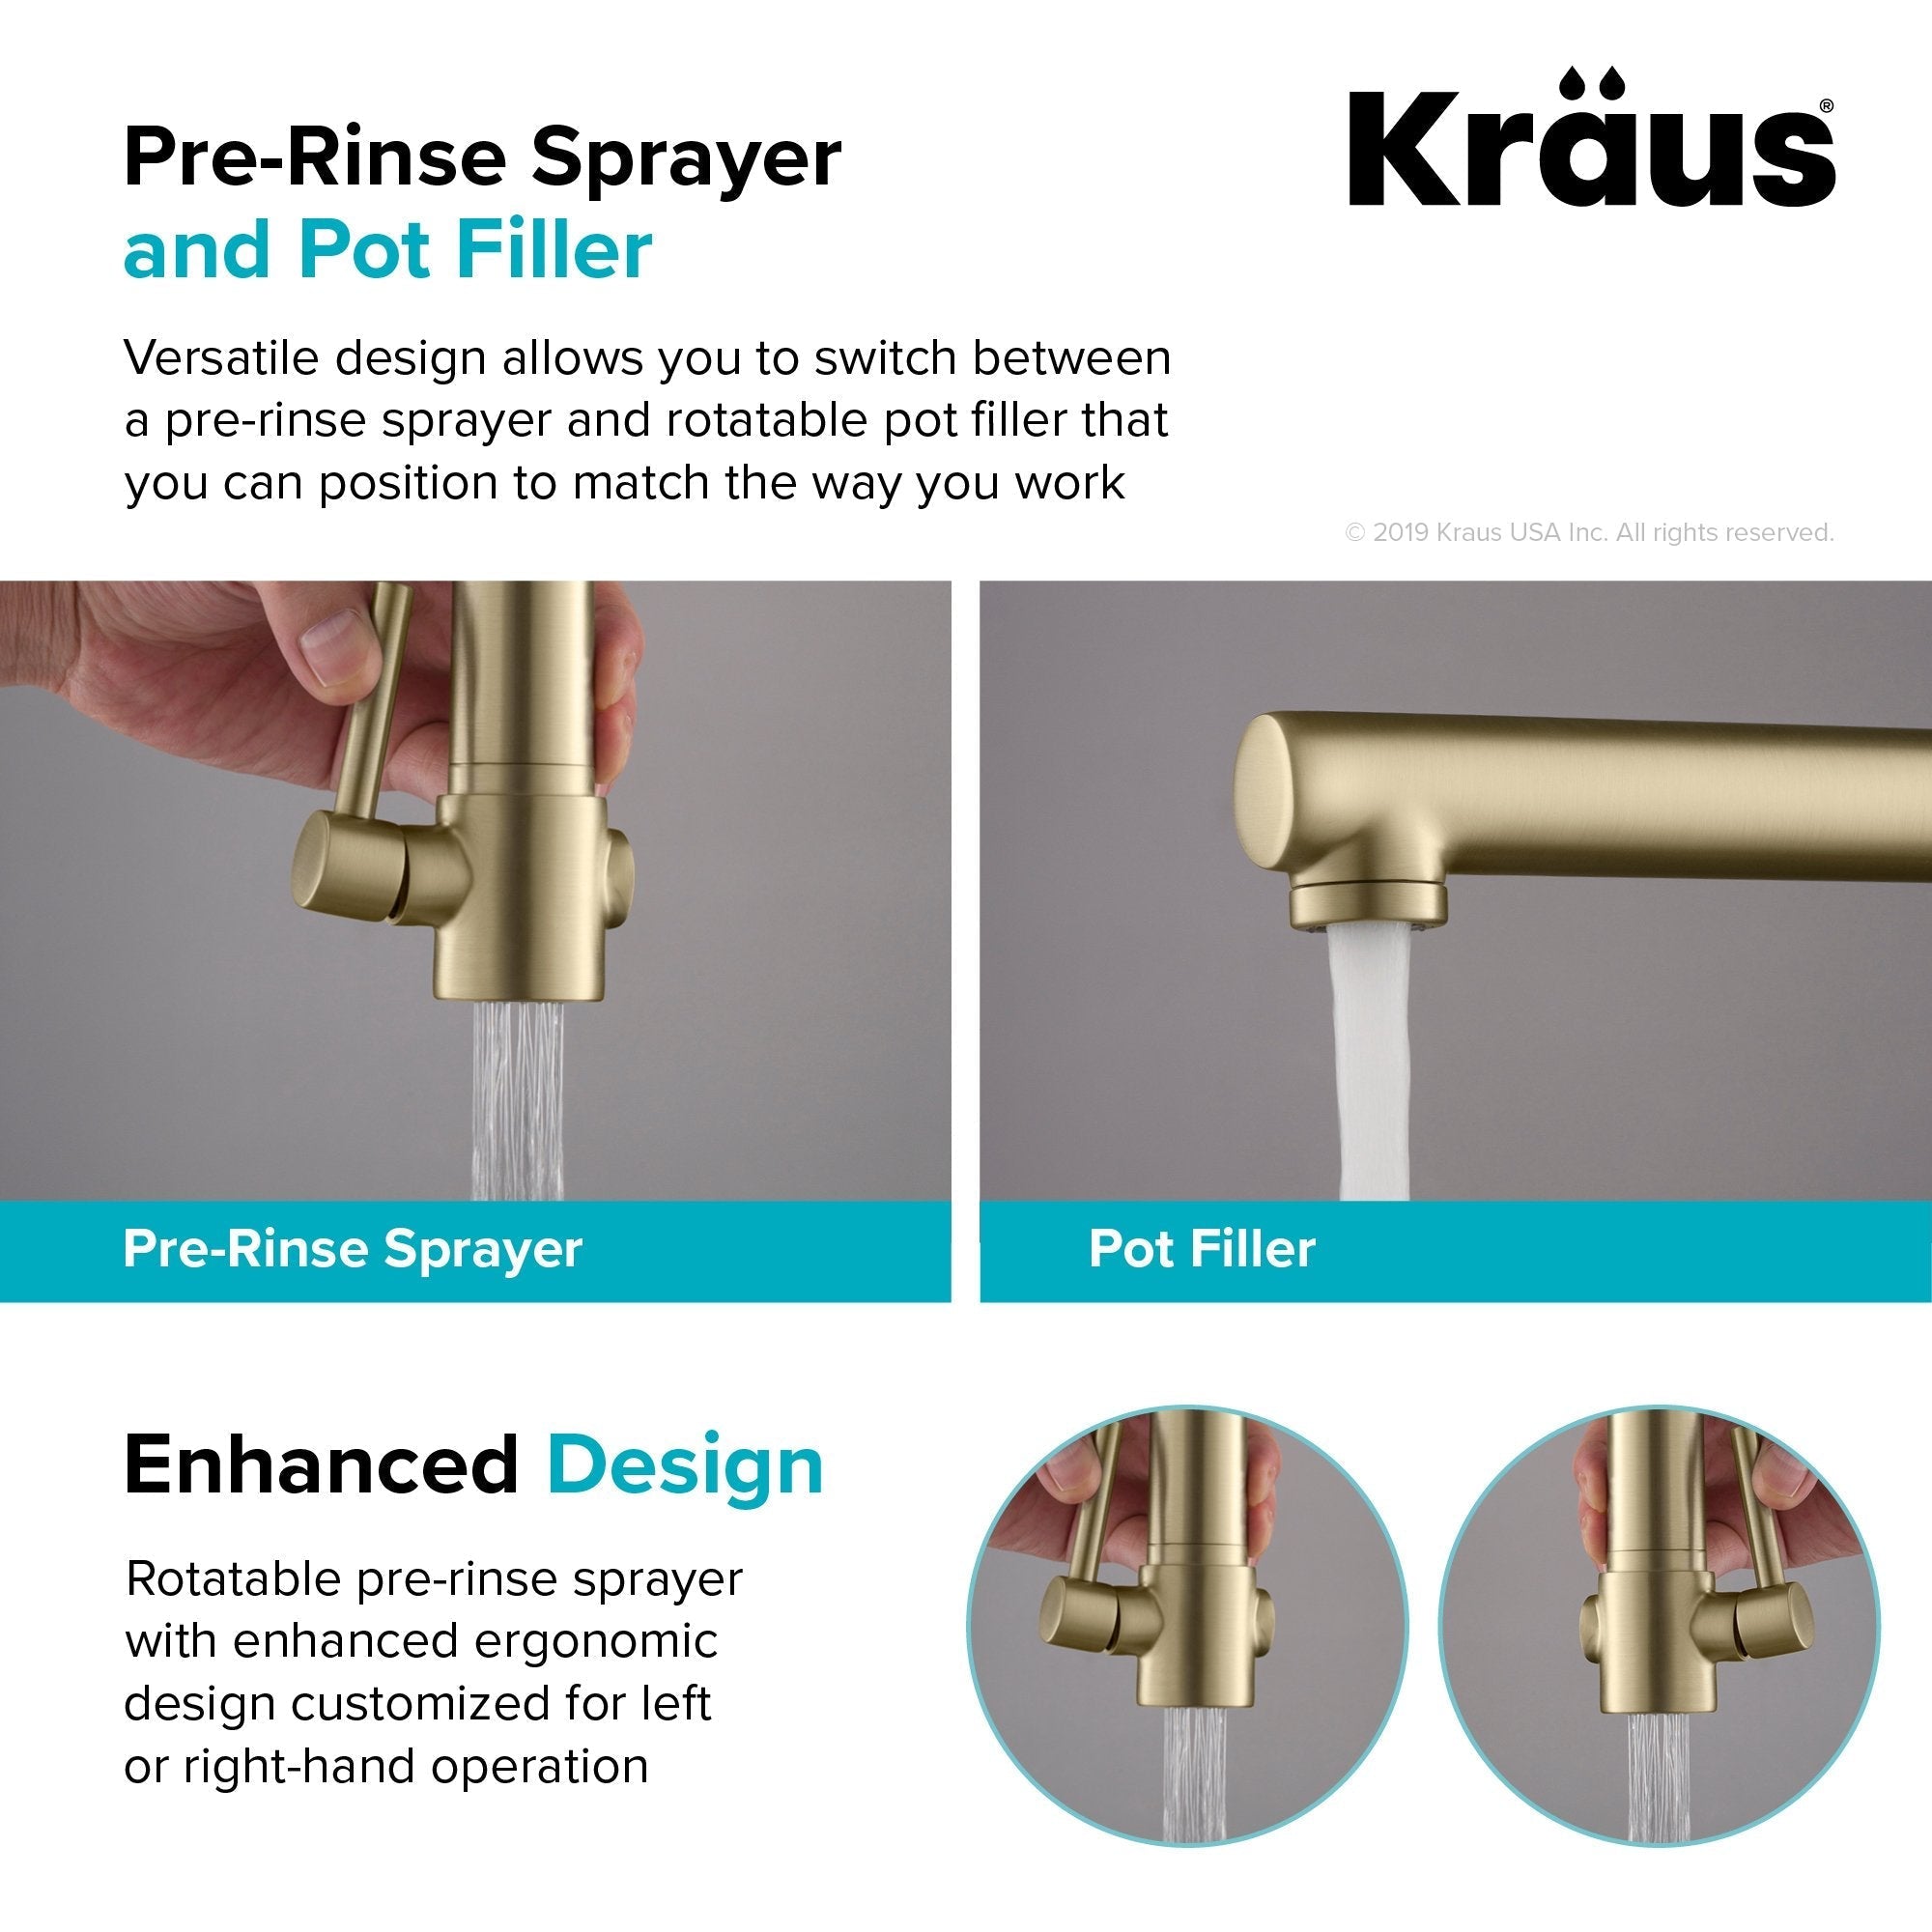 KRAUS Artec Pro 2-Function Commercial Style Pre-Rinse Kitchen Faucet in Brushed Gold/Matte Black KPF-1603BGMB | DirectSinks